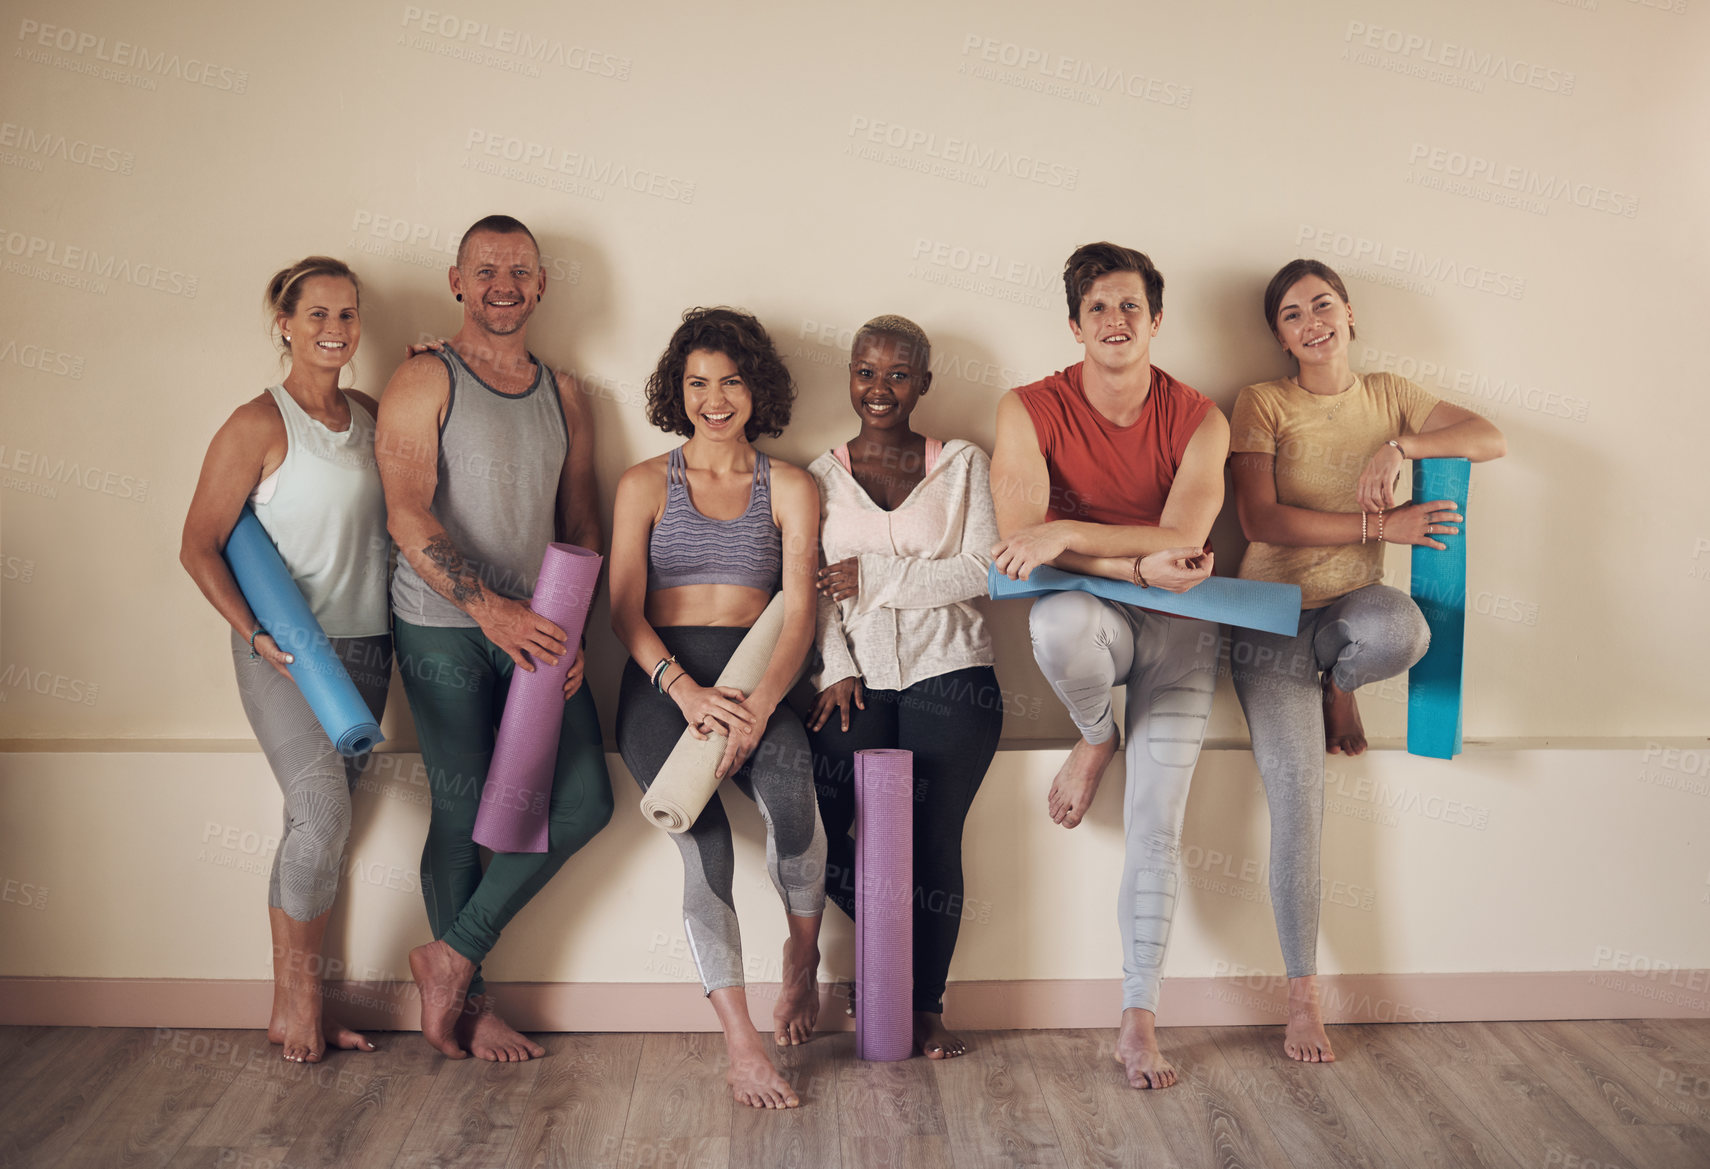 Buy stock photo Full length portrait of a diverse group of yogis sitting together and bonding after an indoor yoga session